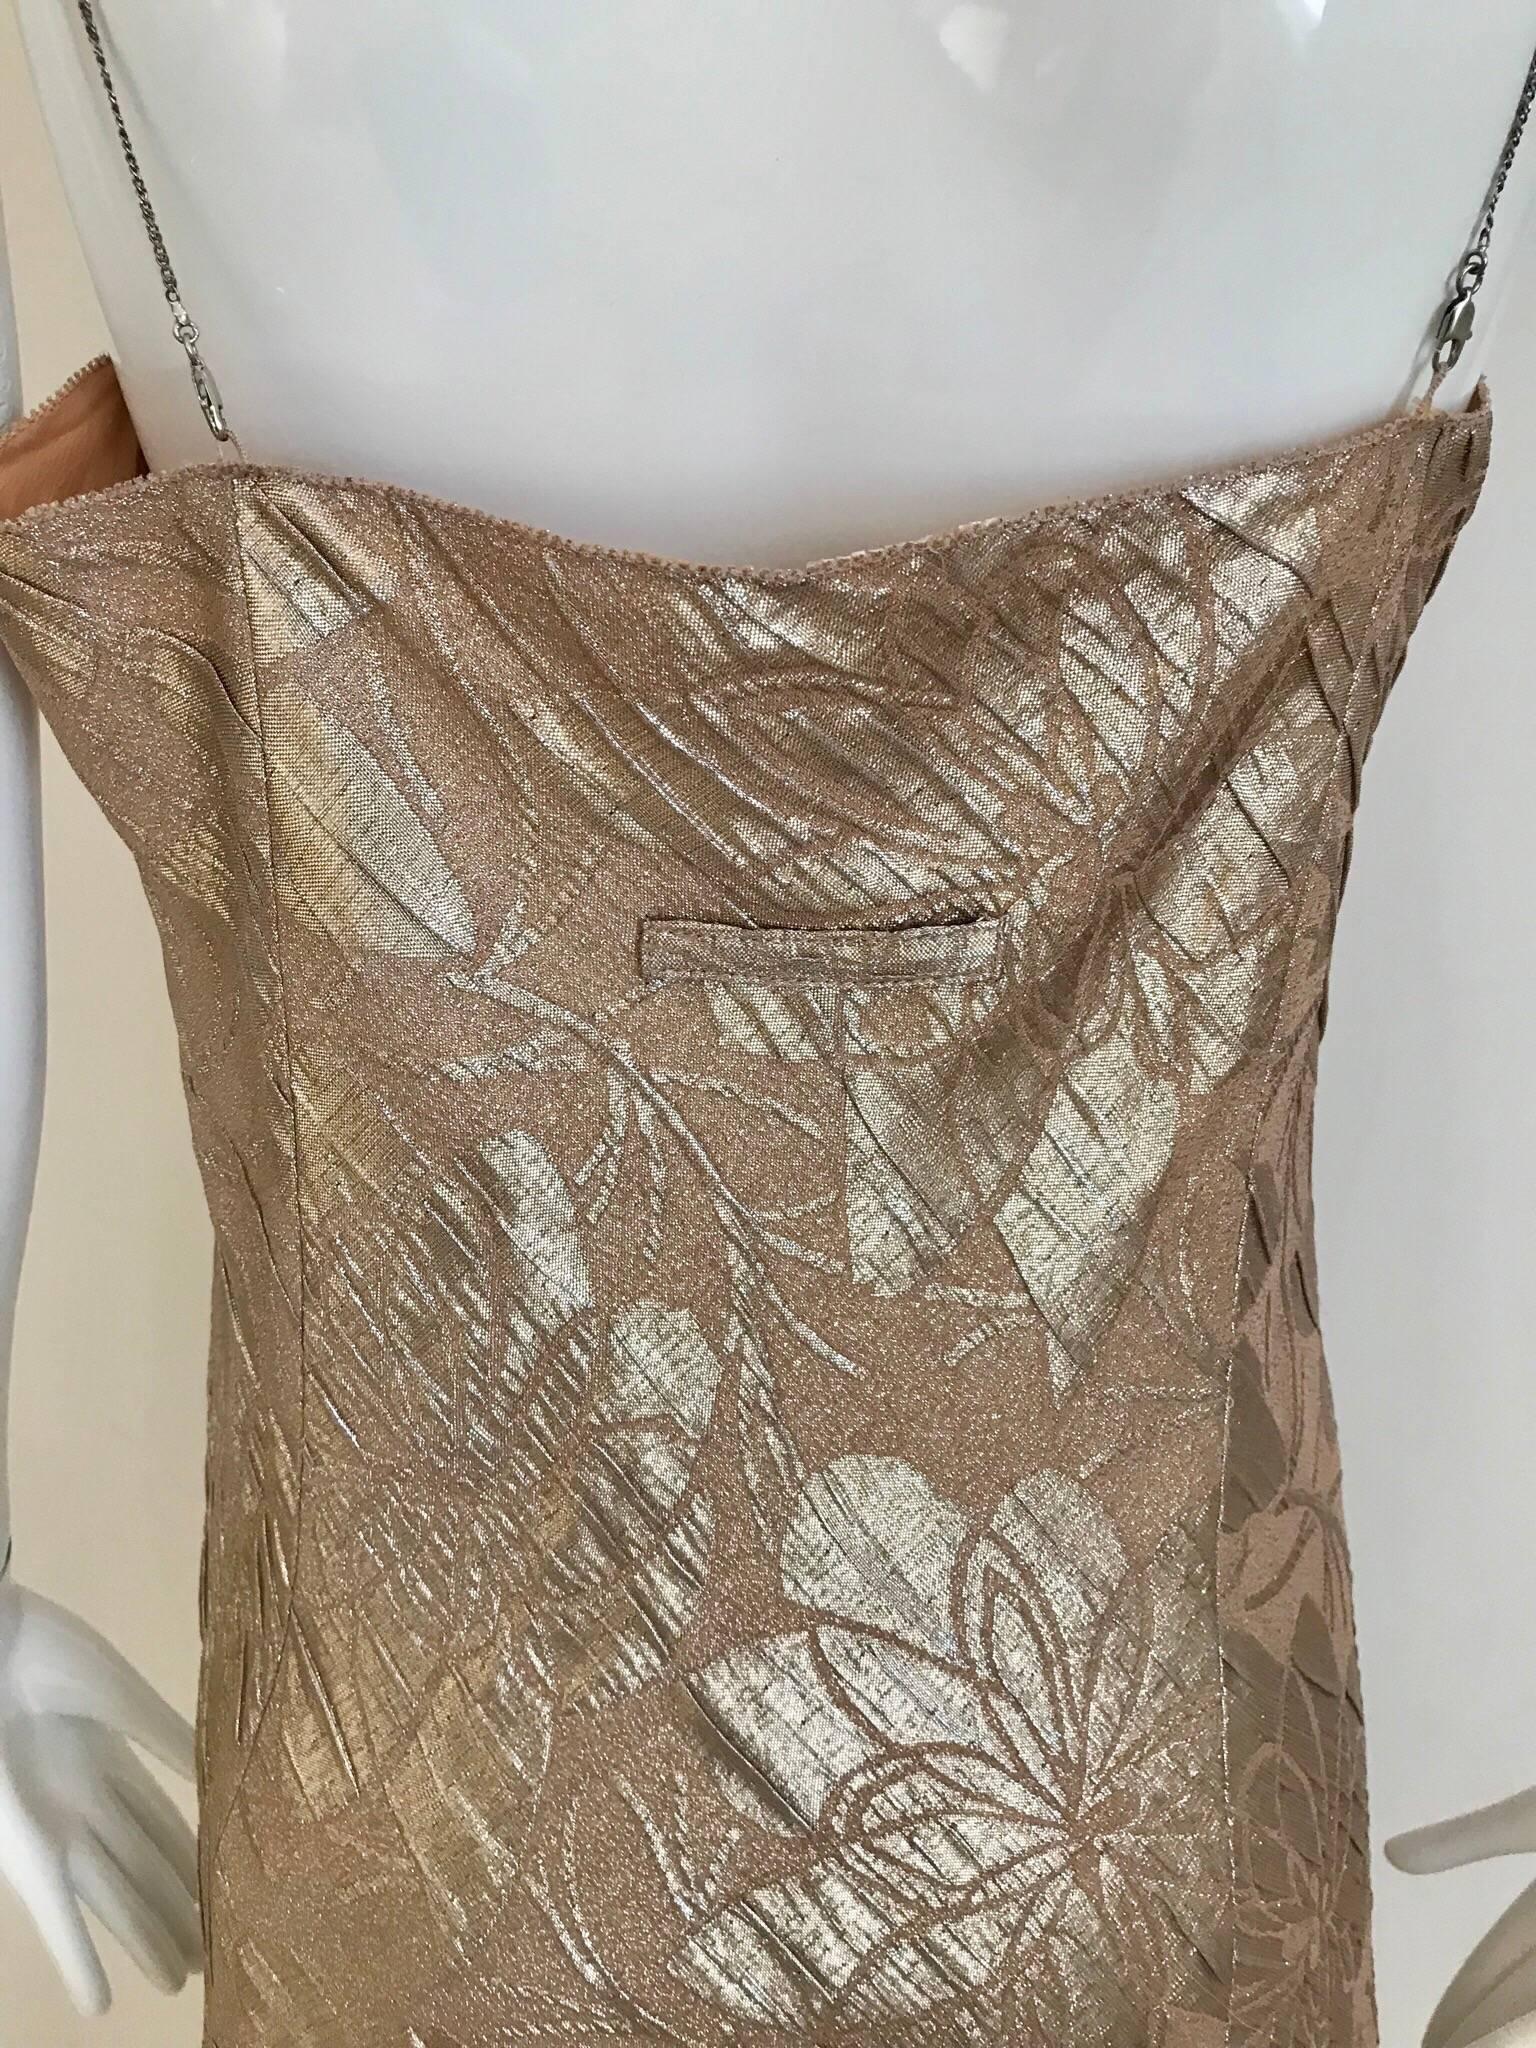 Jean Paul Gaultier Metallic Silk Jacquard  Dress with Jacket  In Excellent Condition For Sale In Beverly Hills, CA